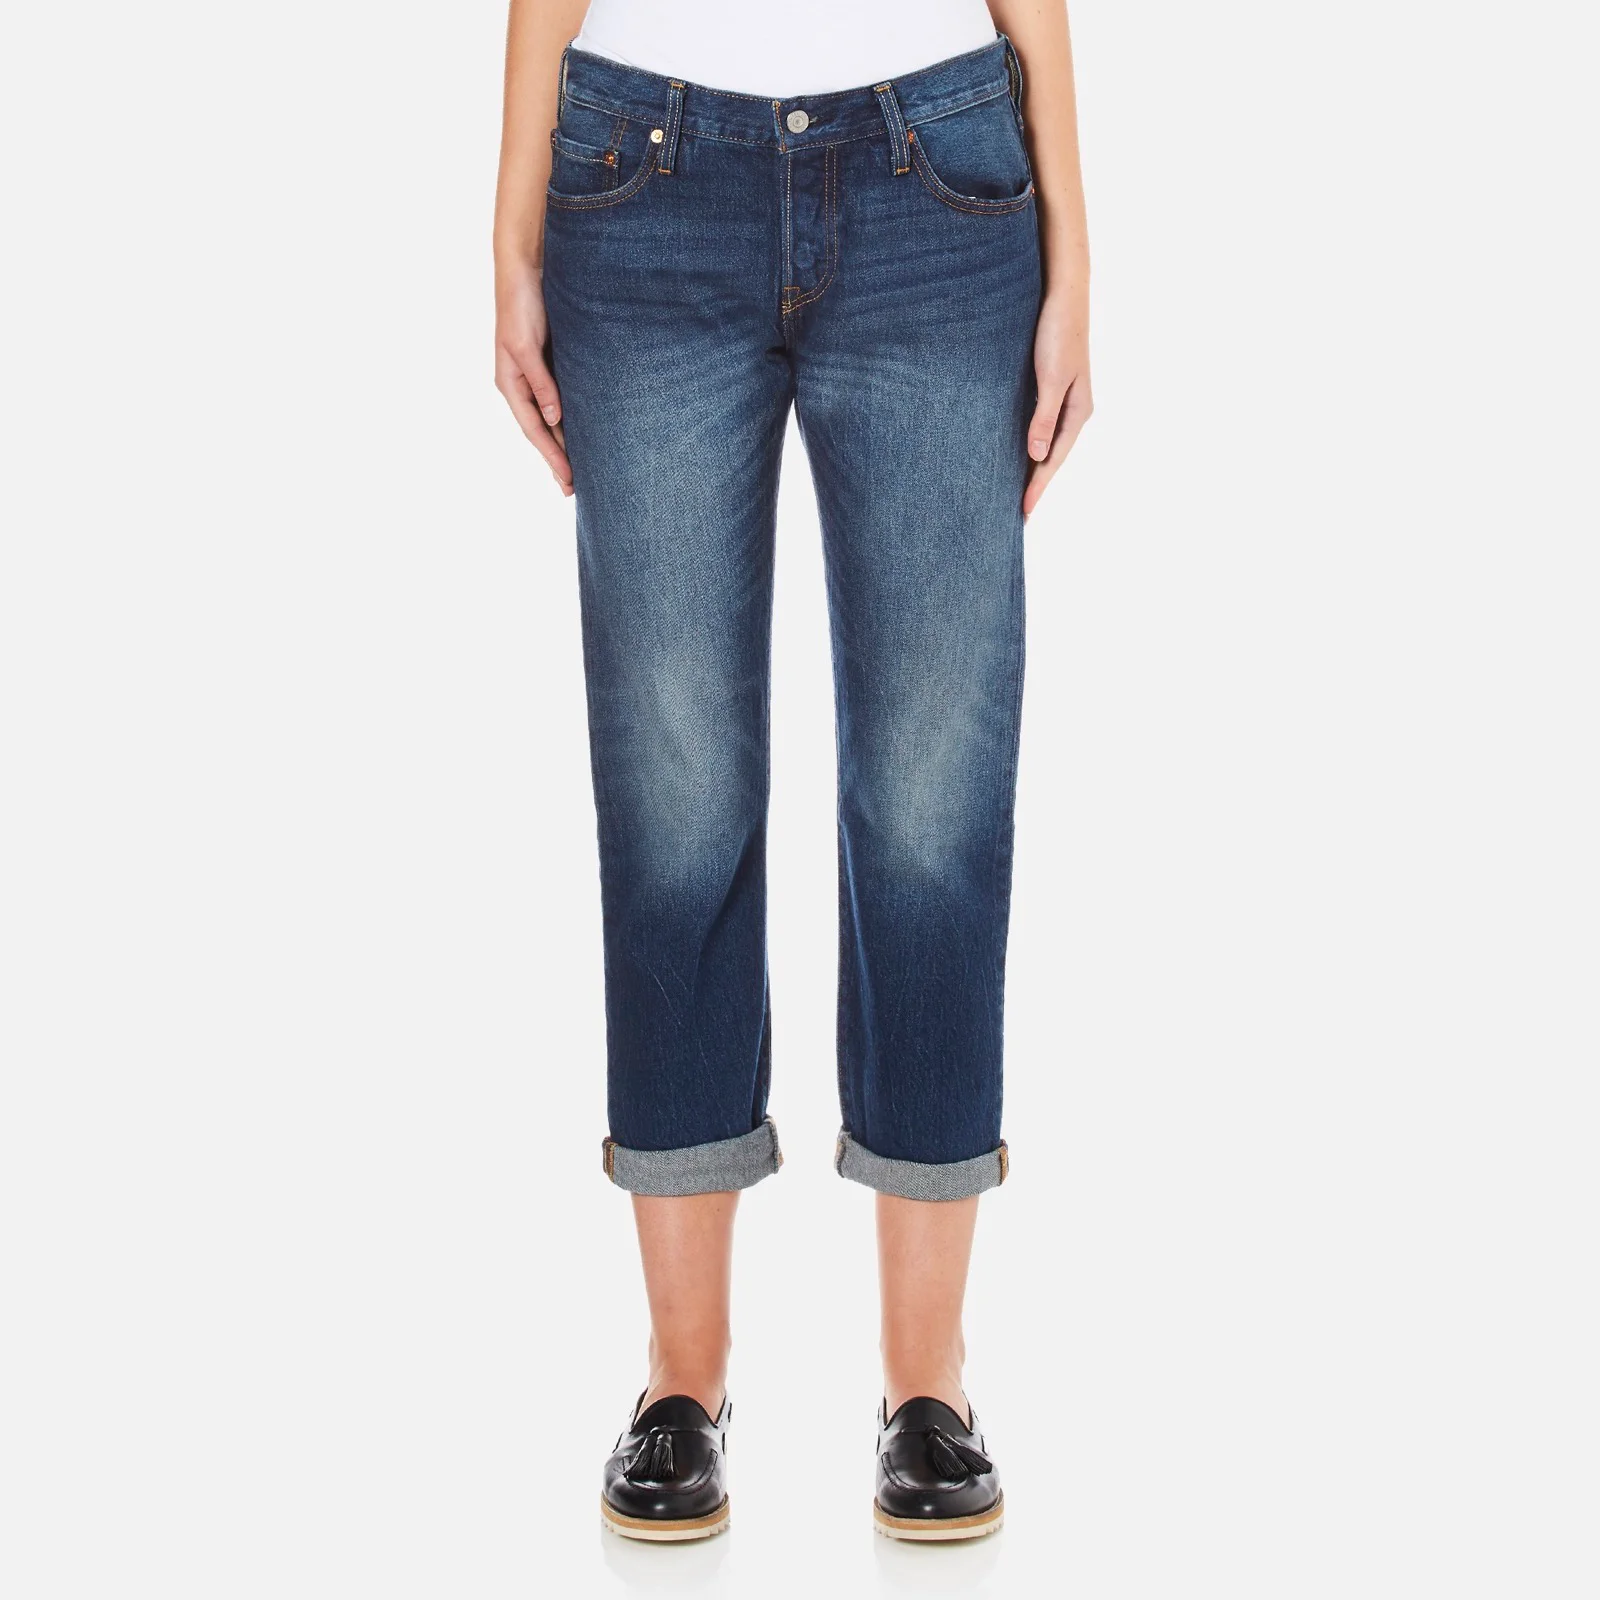 Levi's Women's 501 CT Tapered Fit Jeans - Roasted Indigo Image 1